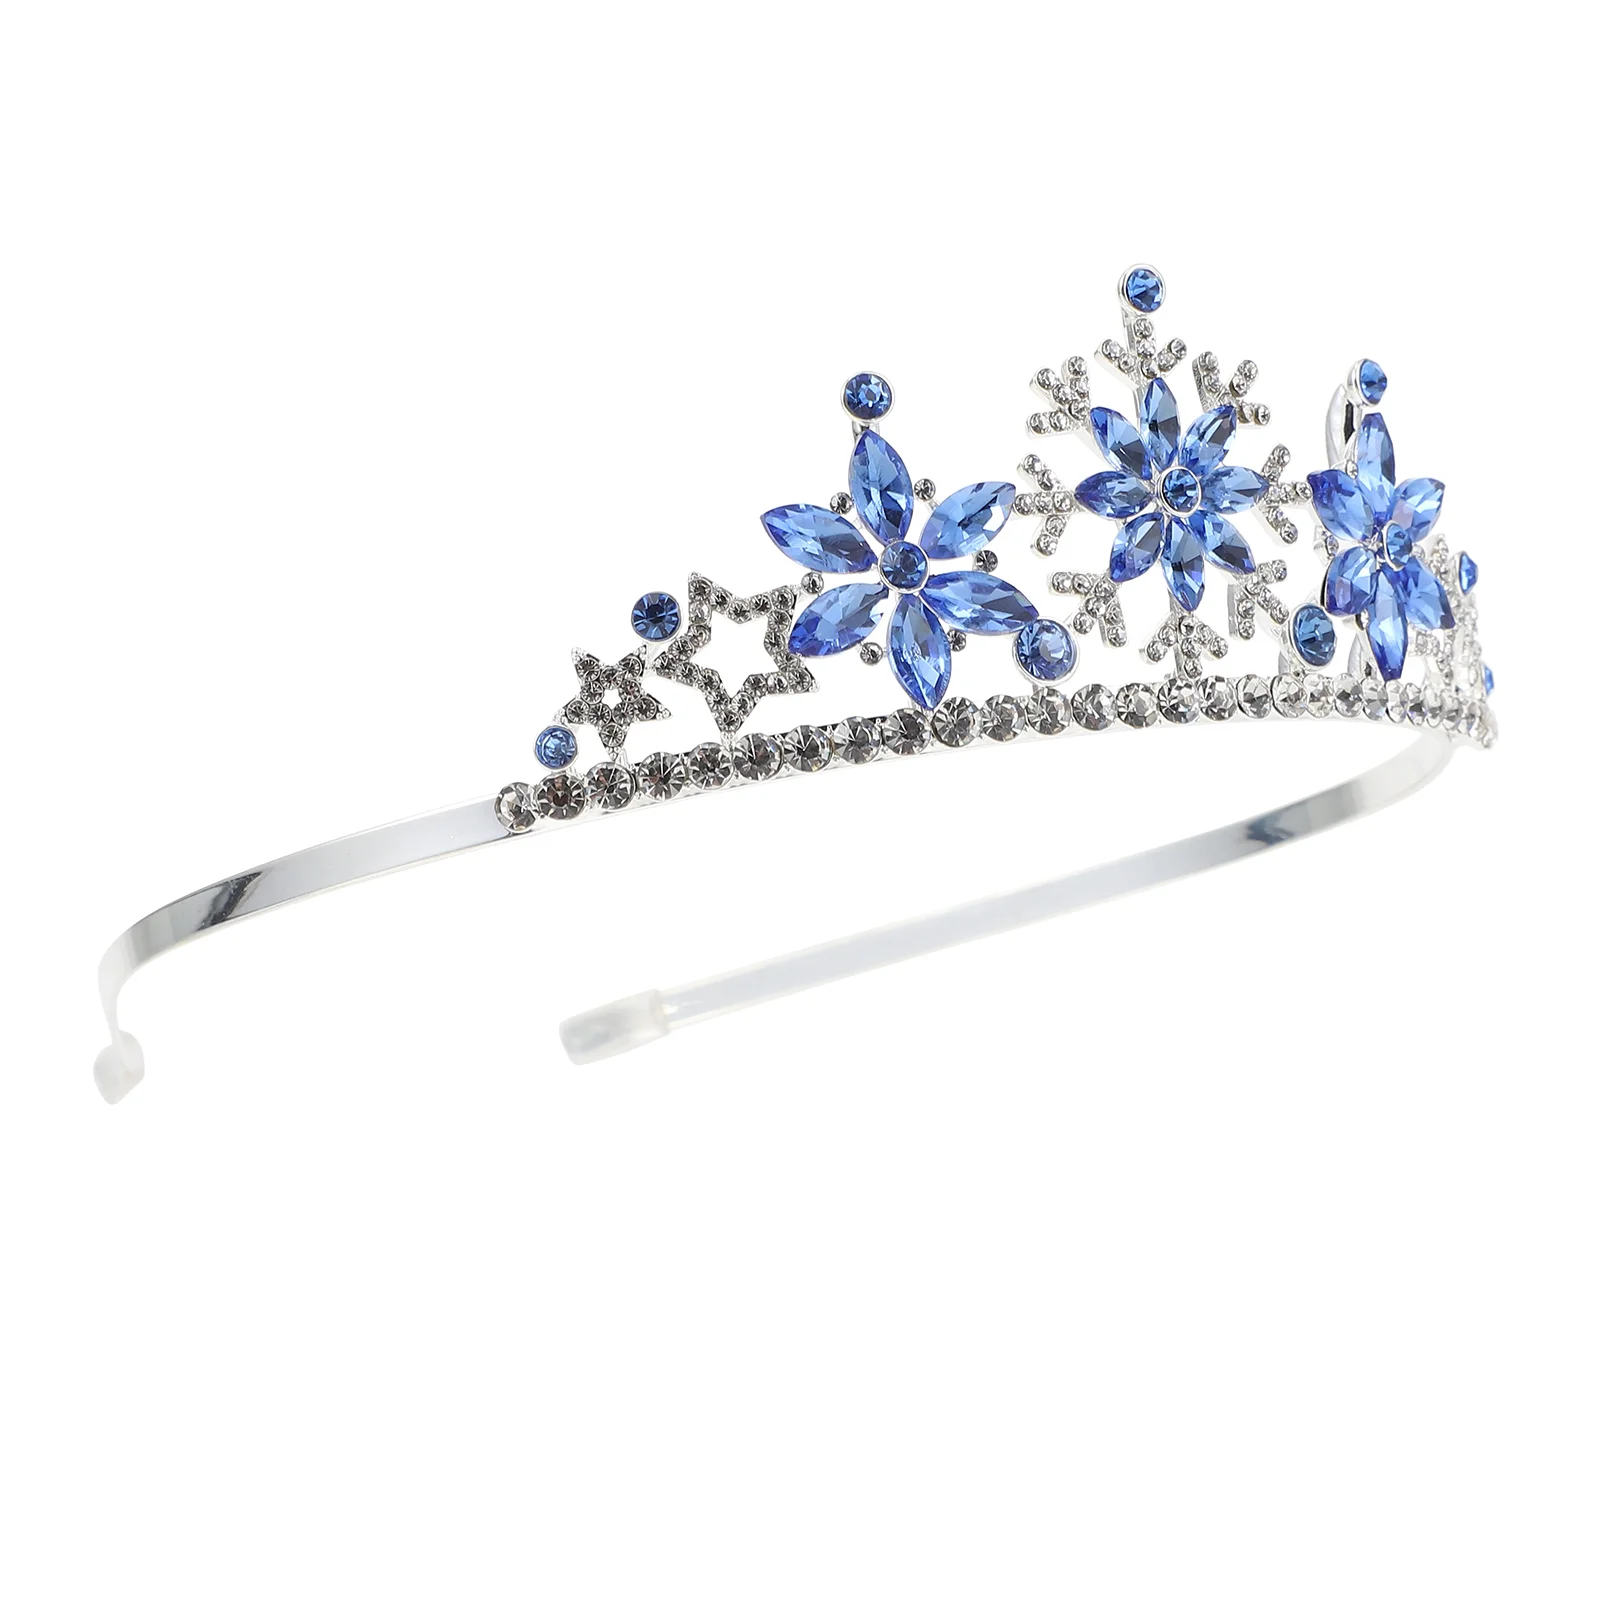 

Children's Crown Headband Kids Hairband Exquisite Alloy Decor Wedding Pieces Brides Role Play Party Accessories Headdress